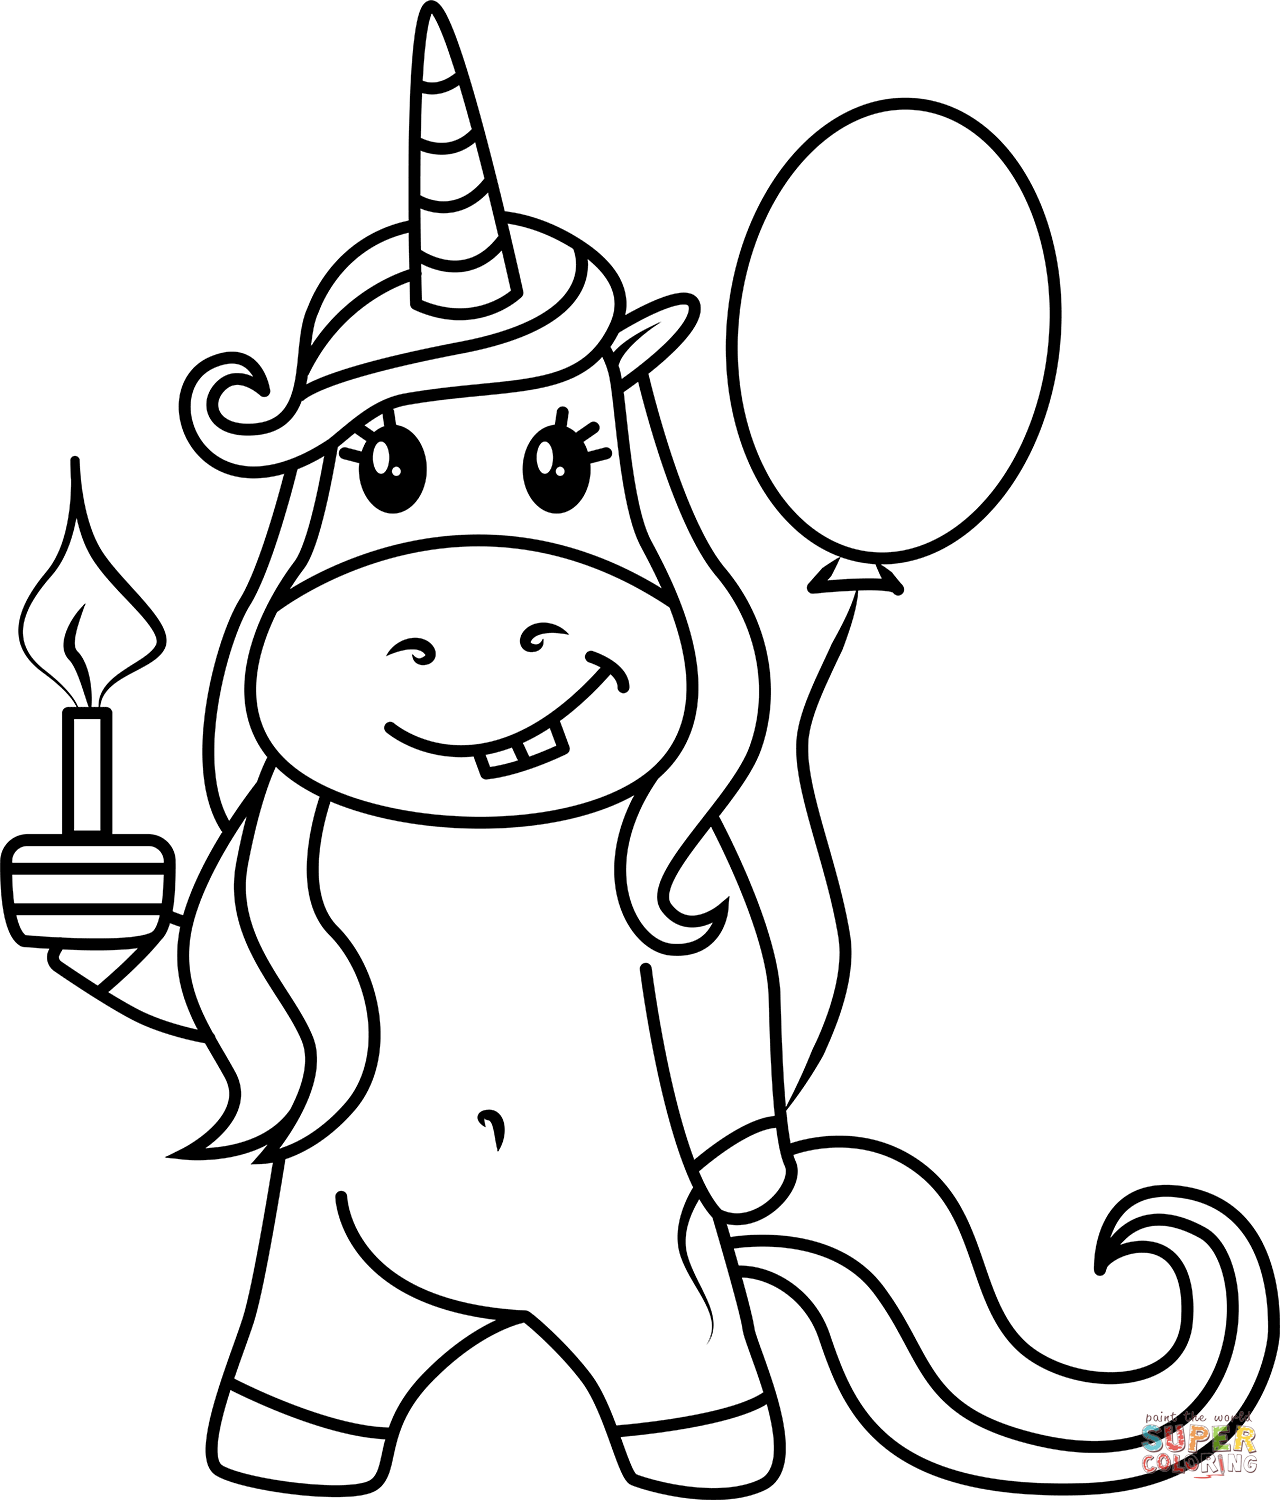 Unicorn birthday coloring page free printable coloring pages